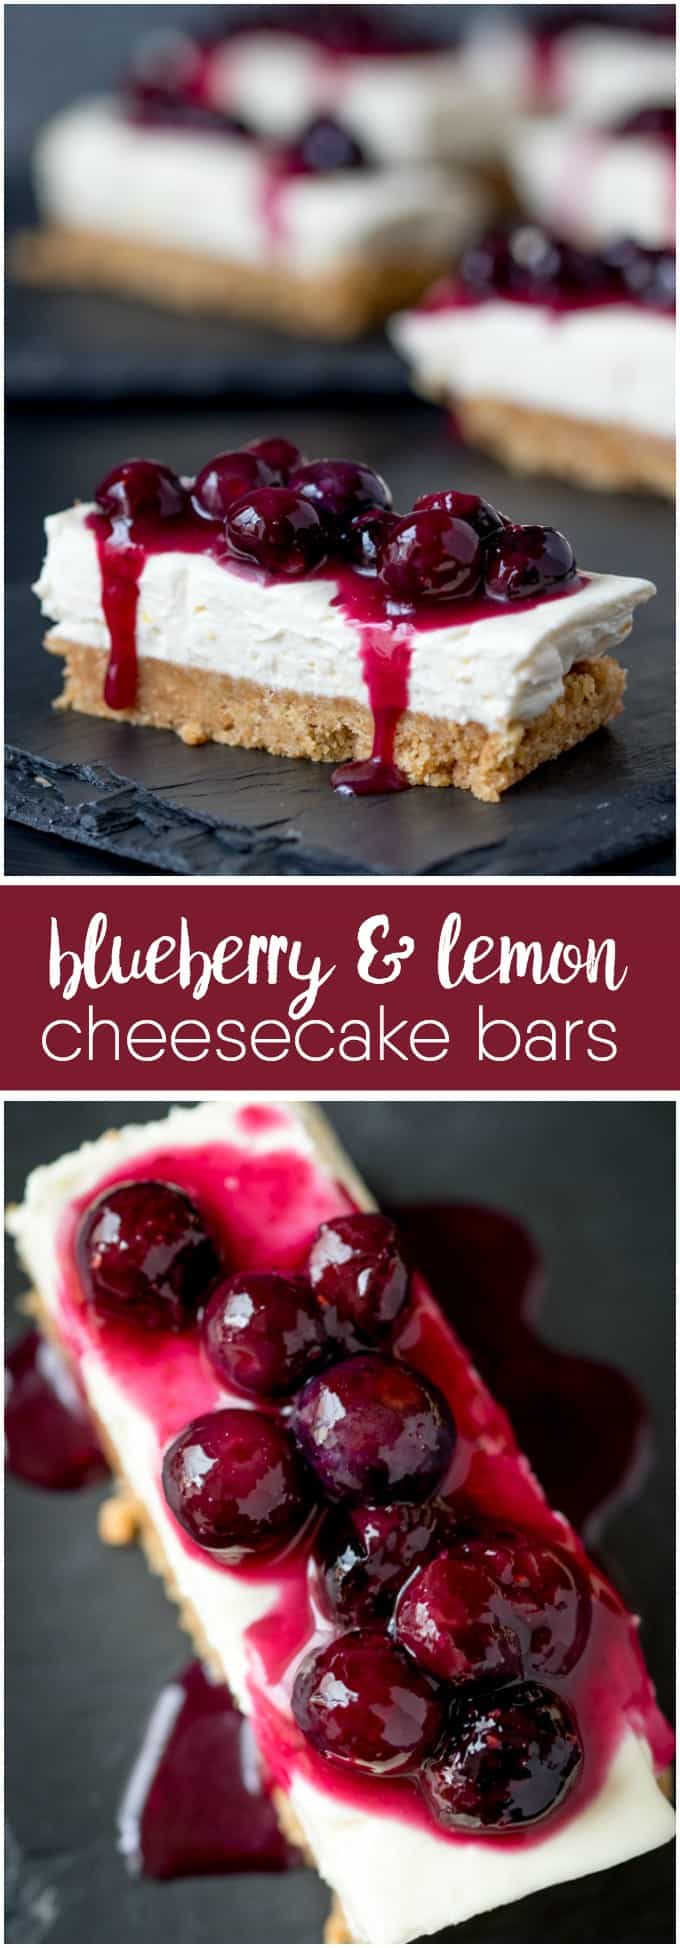 Blueberry & Lemon Cheesecake Bars - Packed full of YUM! Blueberry and lemon cannot be beat when it's paired with luscious cheesecake. Plus, this dessert is no-bake!